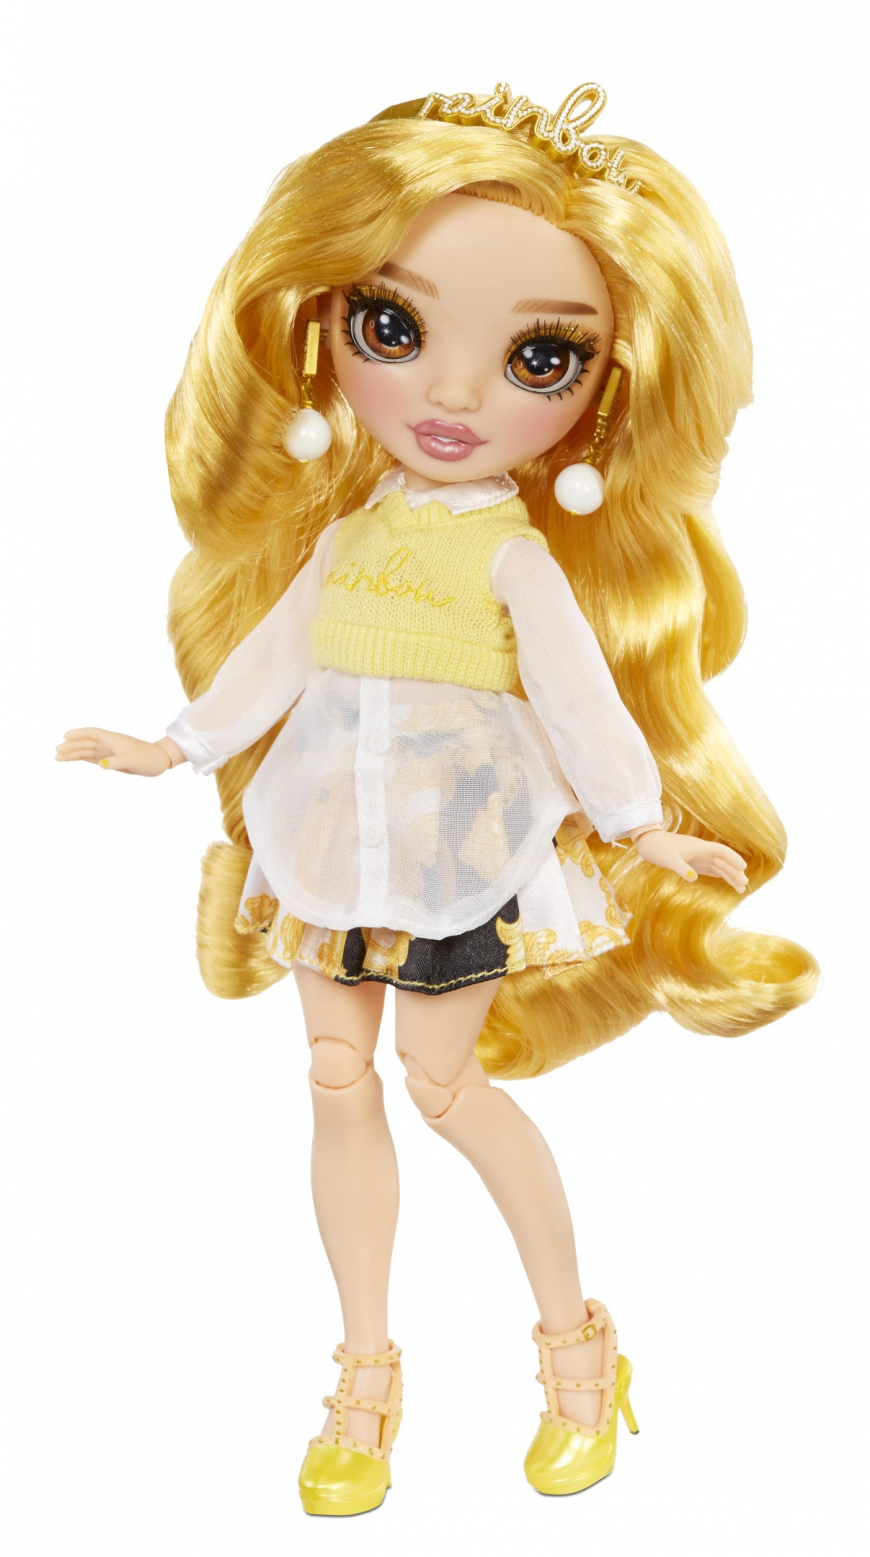 Rainbow High Series 3 Marigold doll - Sheryl Meyer doll  In second outfit